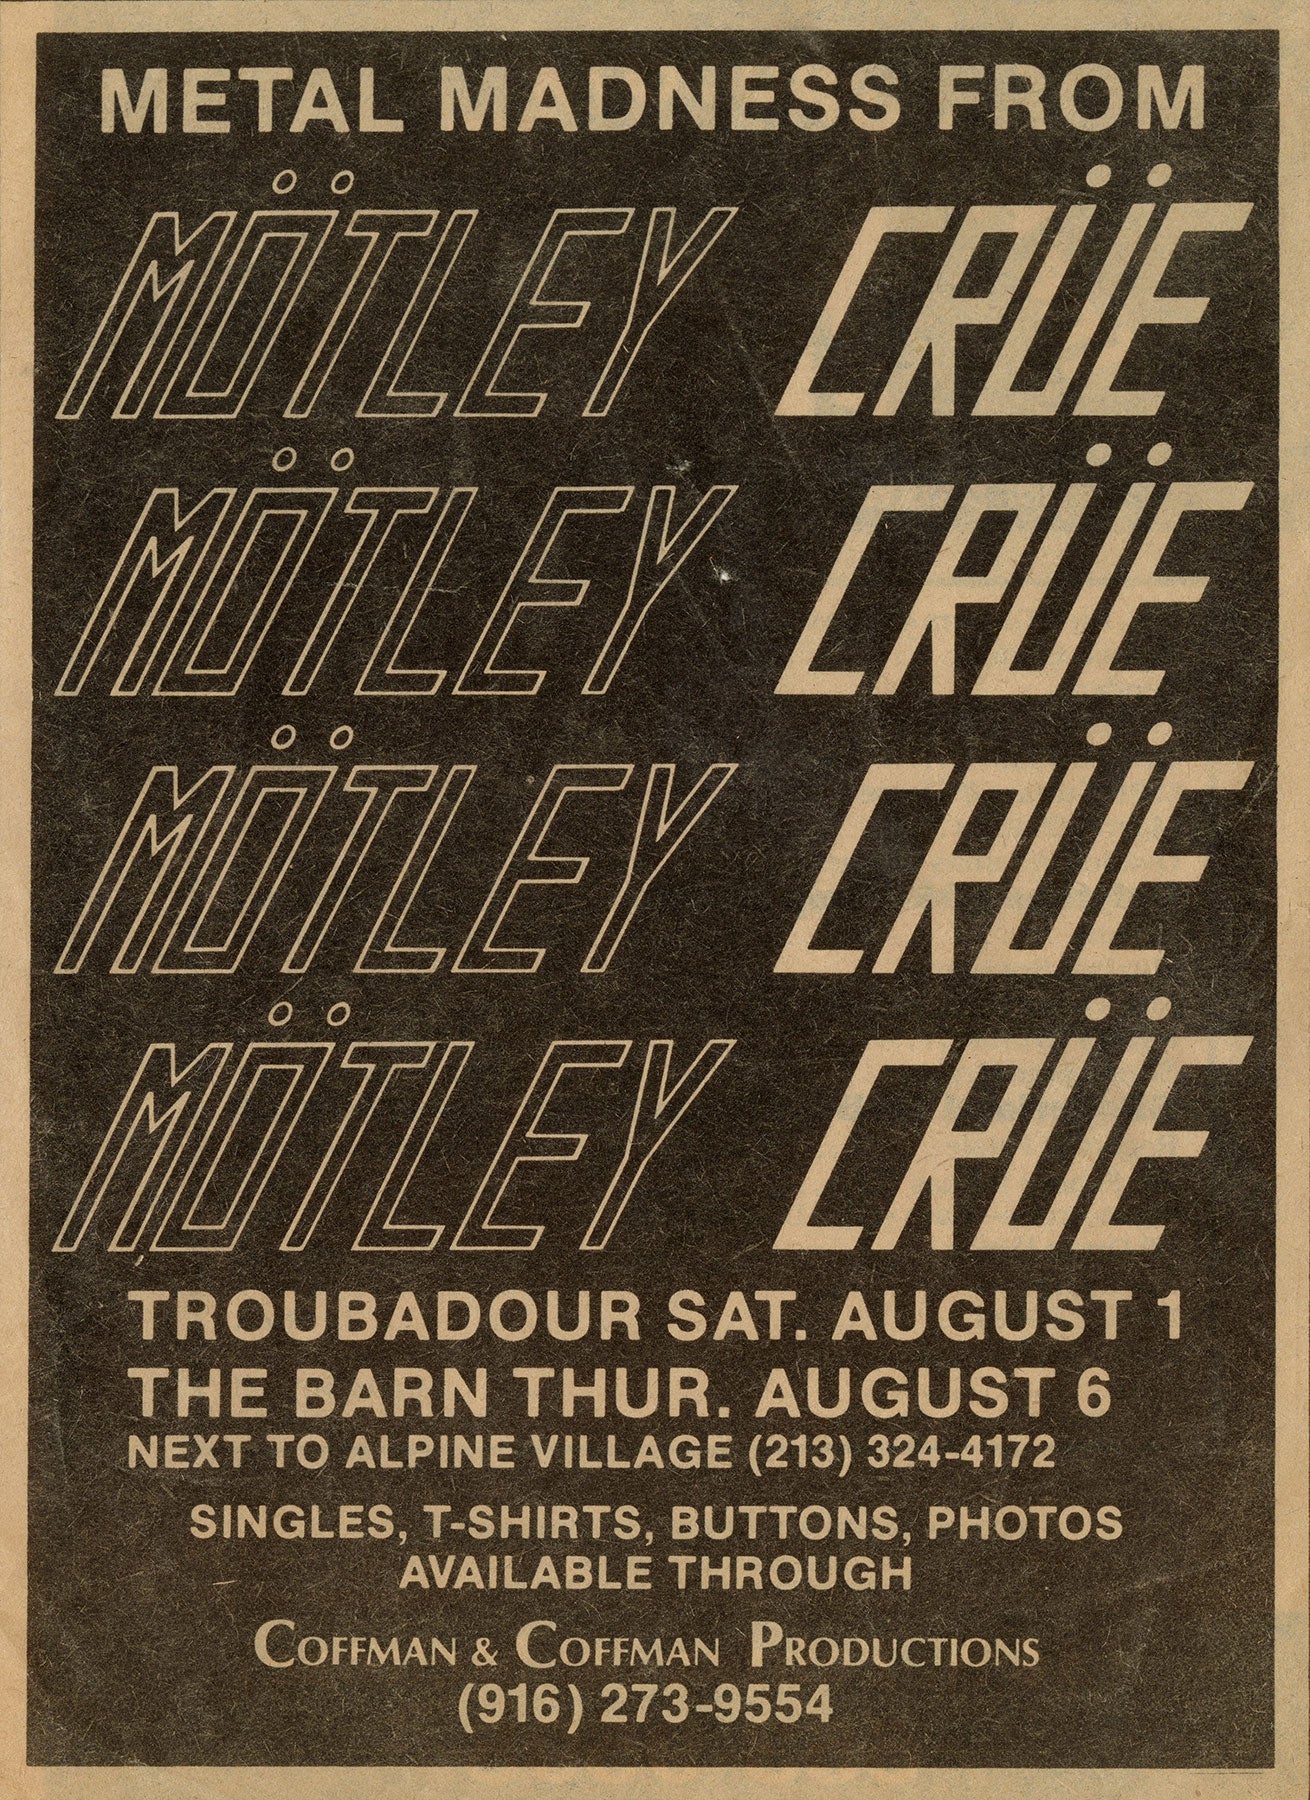 Mötley Crüe flyer promoting 2 shows from 1981